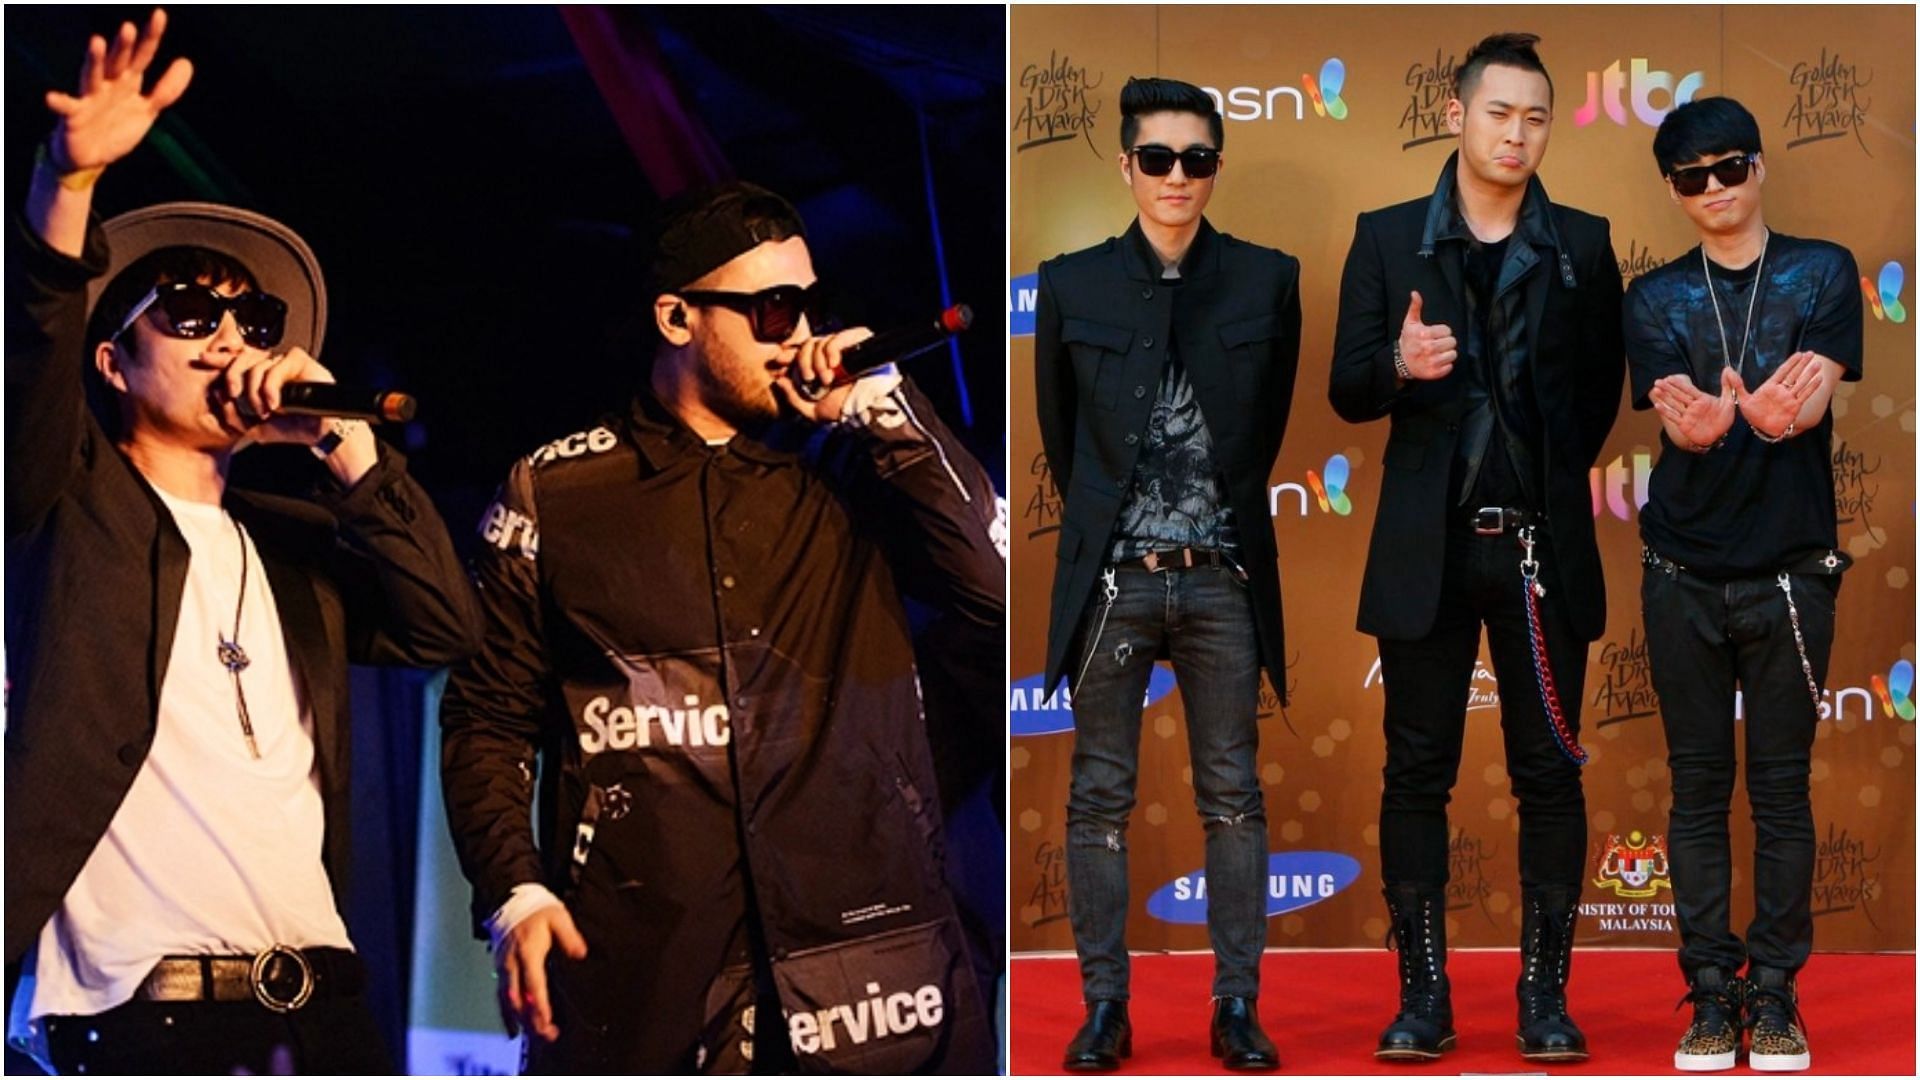 Epik High have announced tour dates for 2023. (Images via Getty)